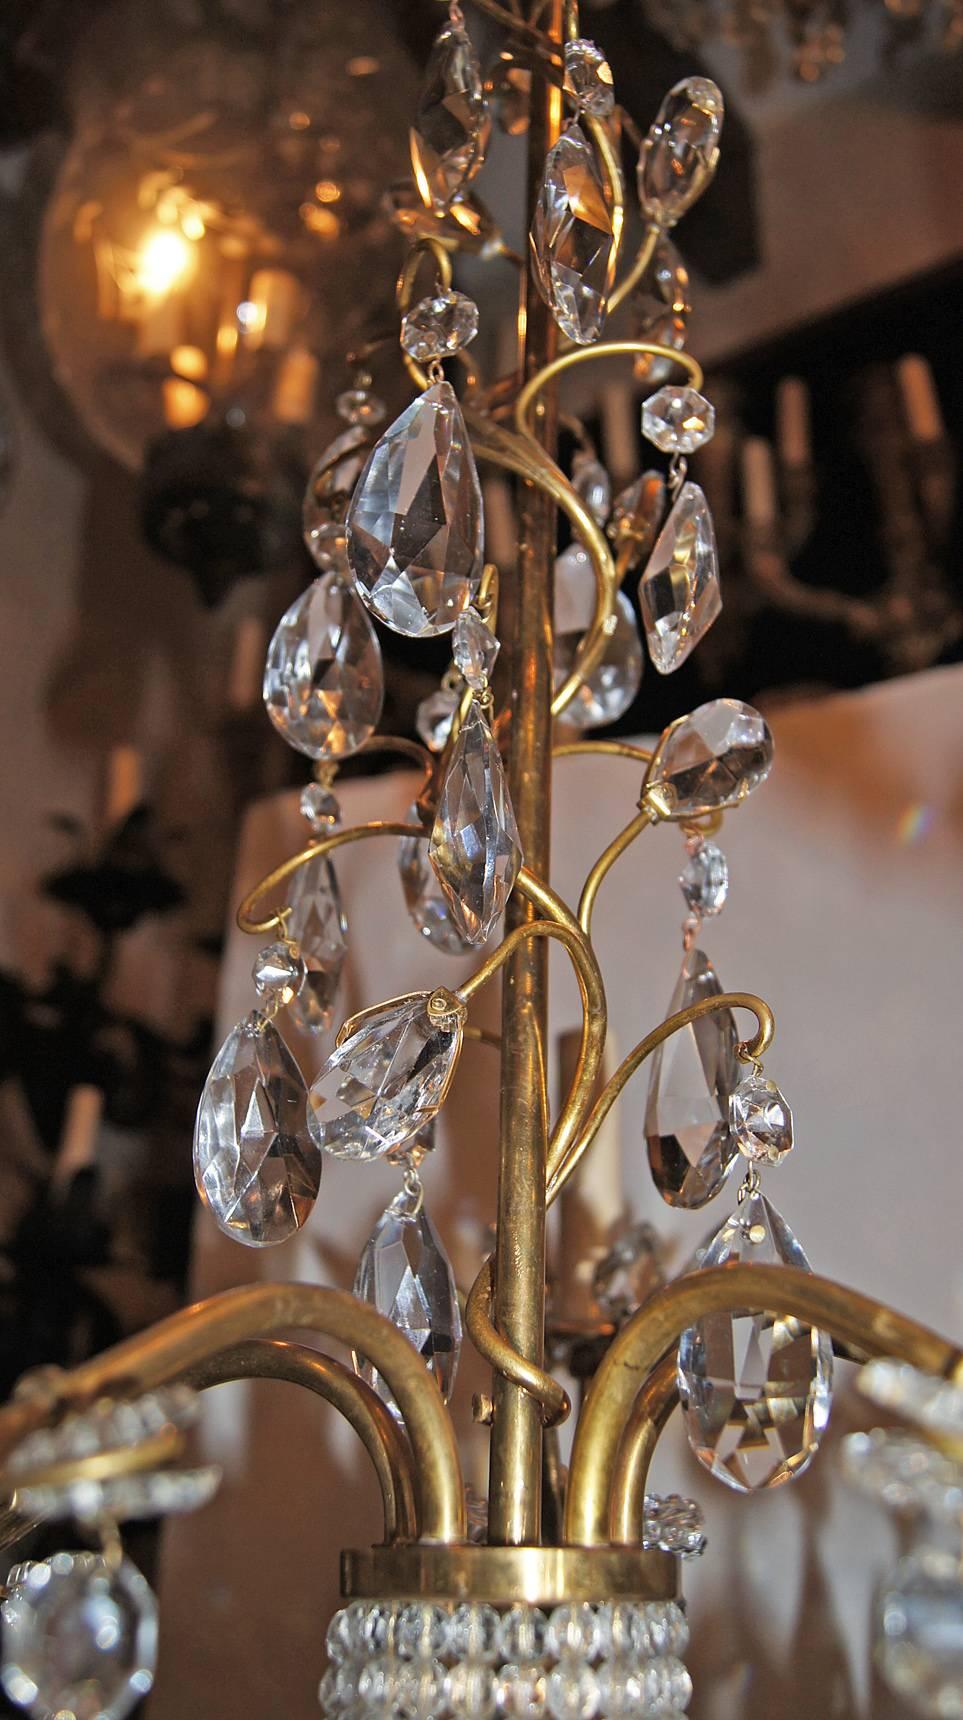 French Gilt Metal Chandelier with Crystals For Sale